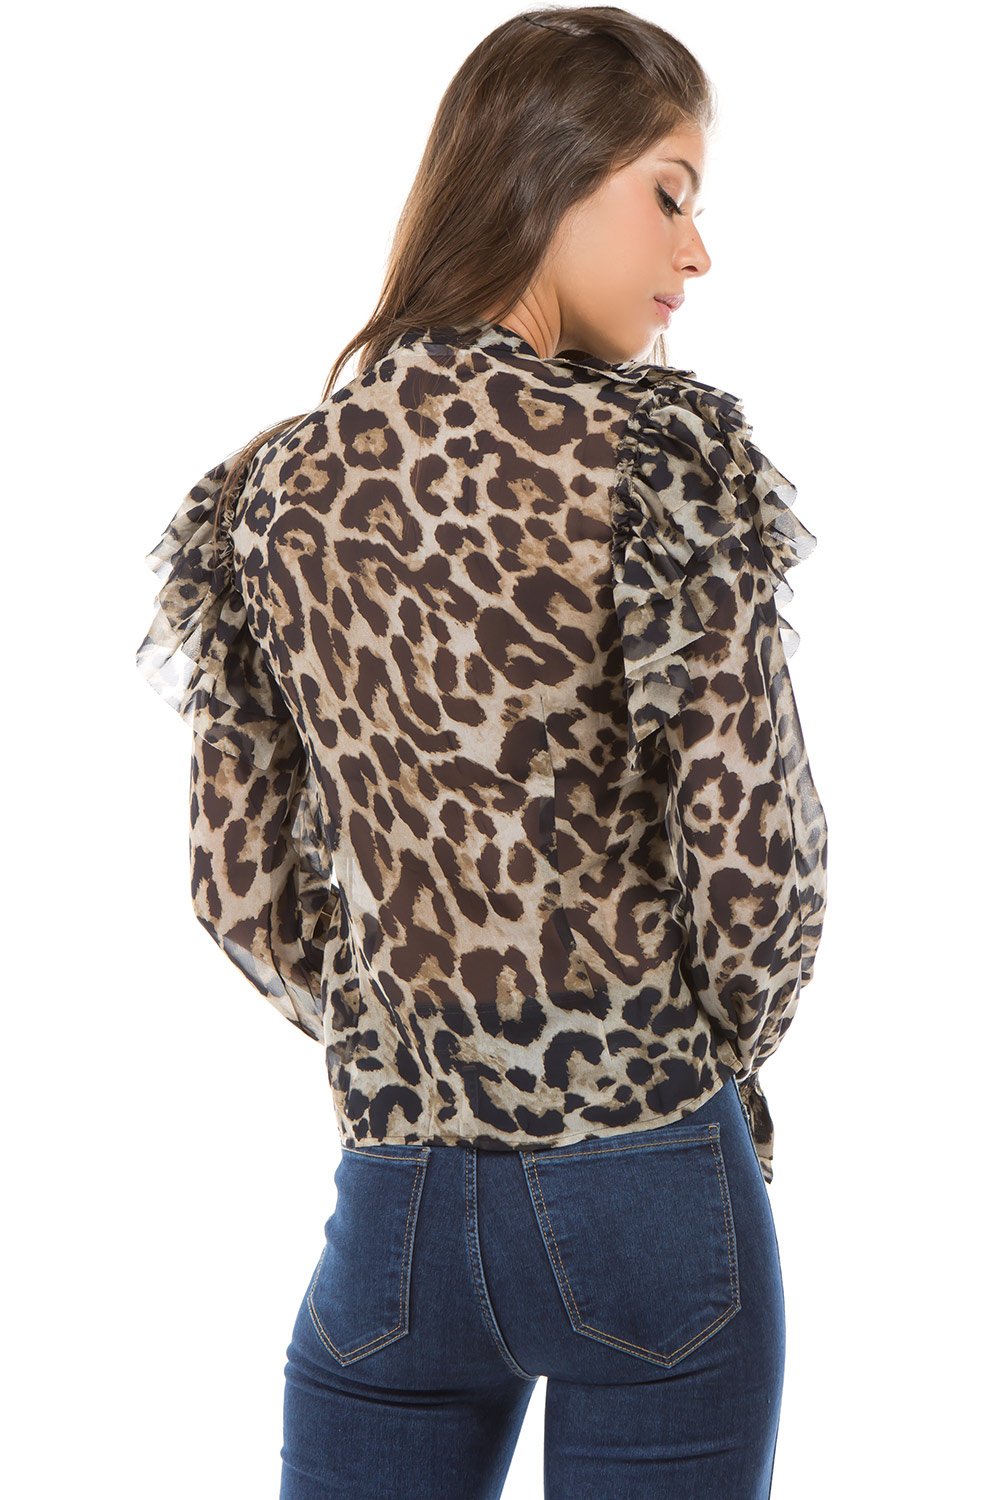 Download Leopard Print Layered Ruffle With Tie Neck Blouse Ti044 F02 Voila Apparel Women S Fashion